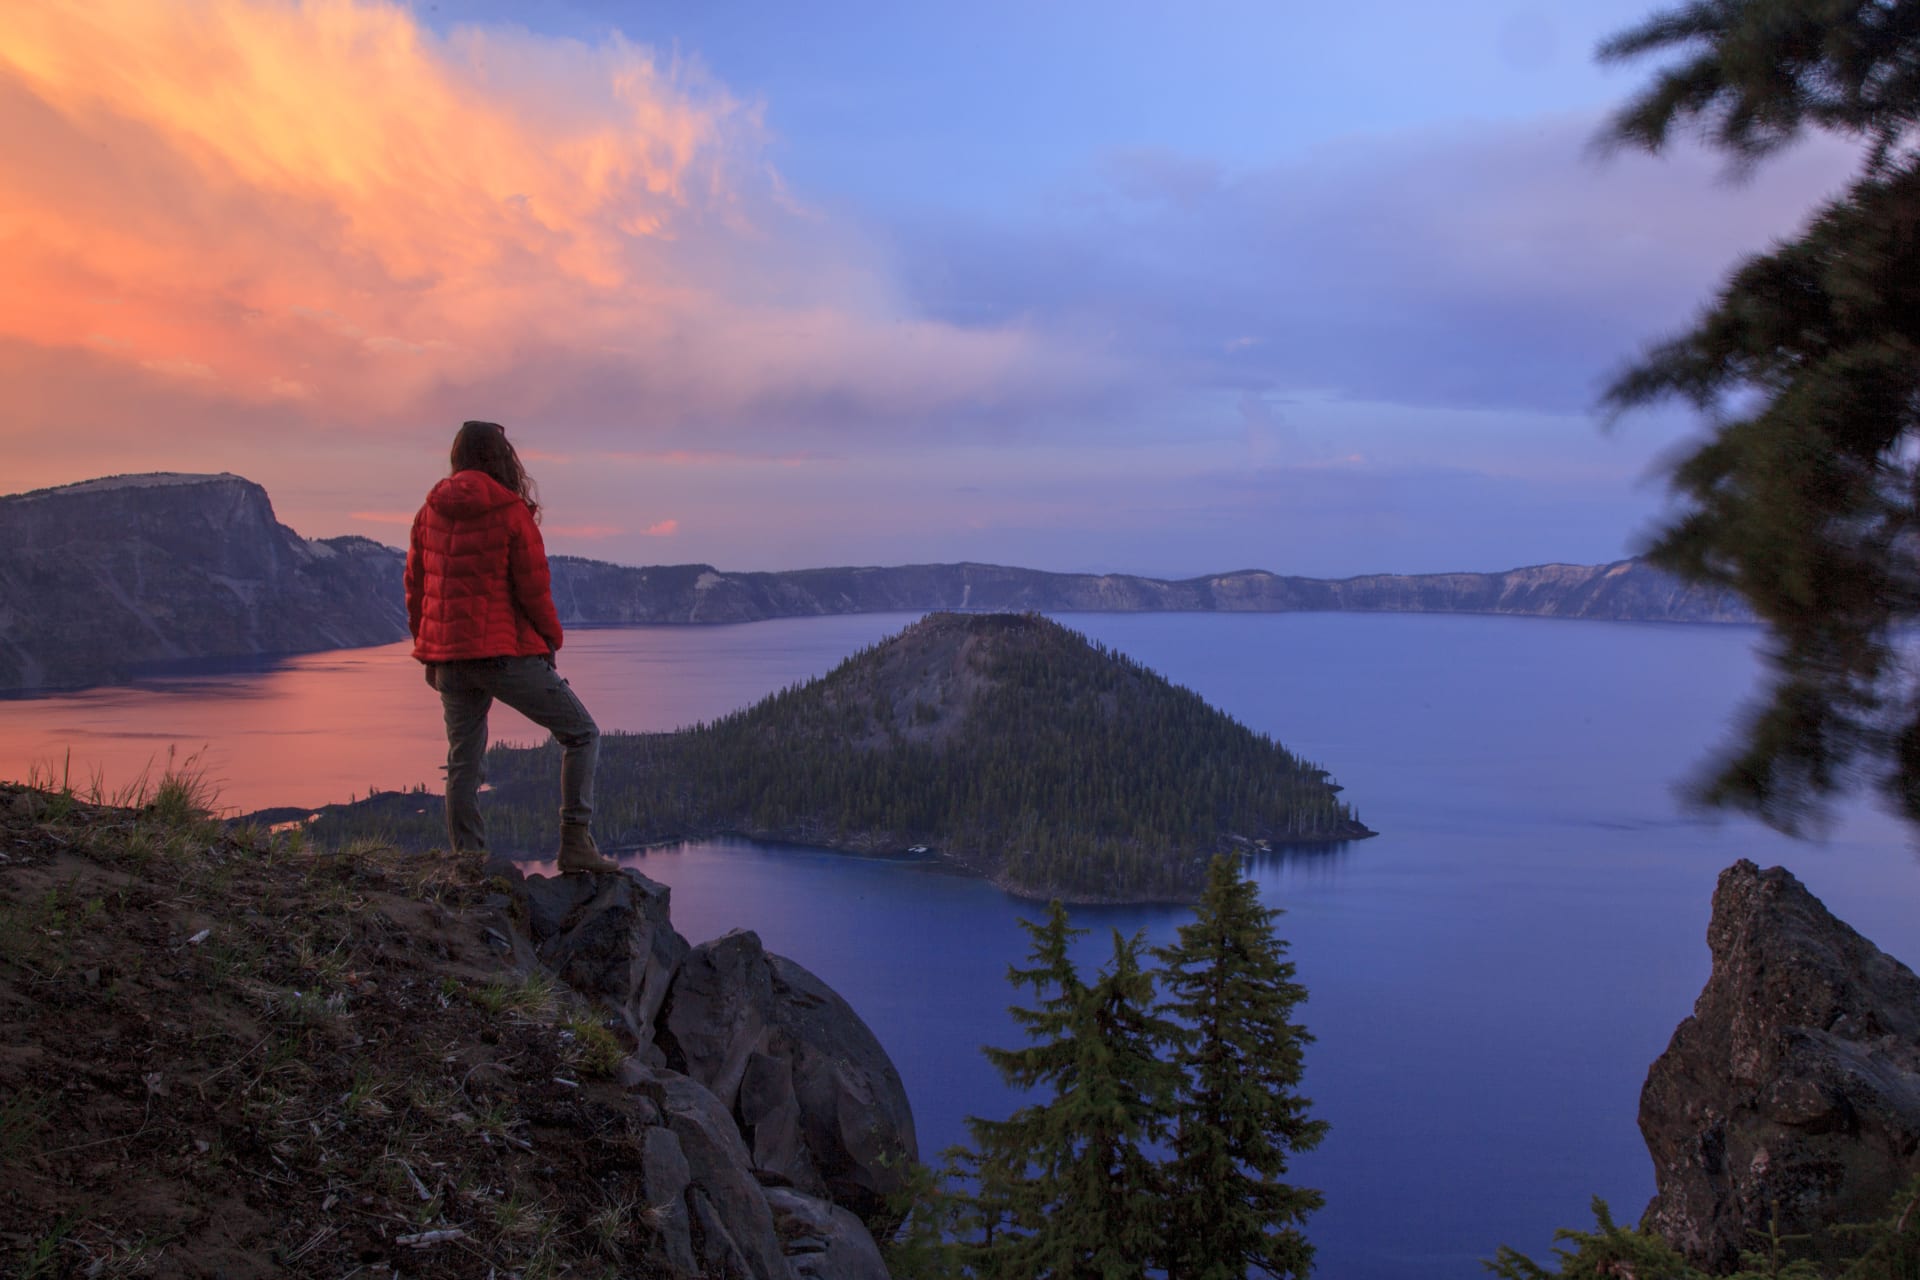 Sunsets at Crater Lake never disappoint! 